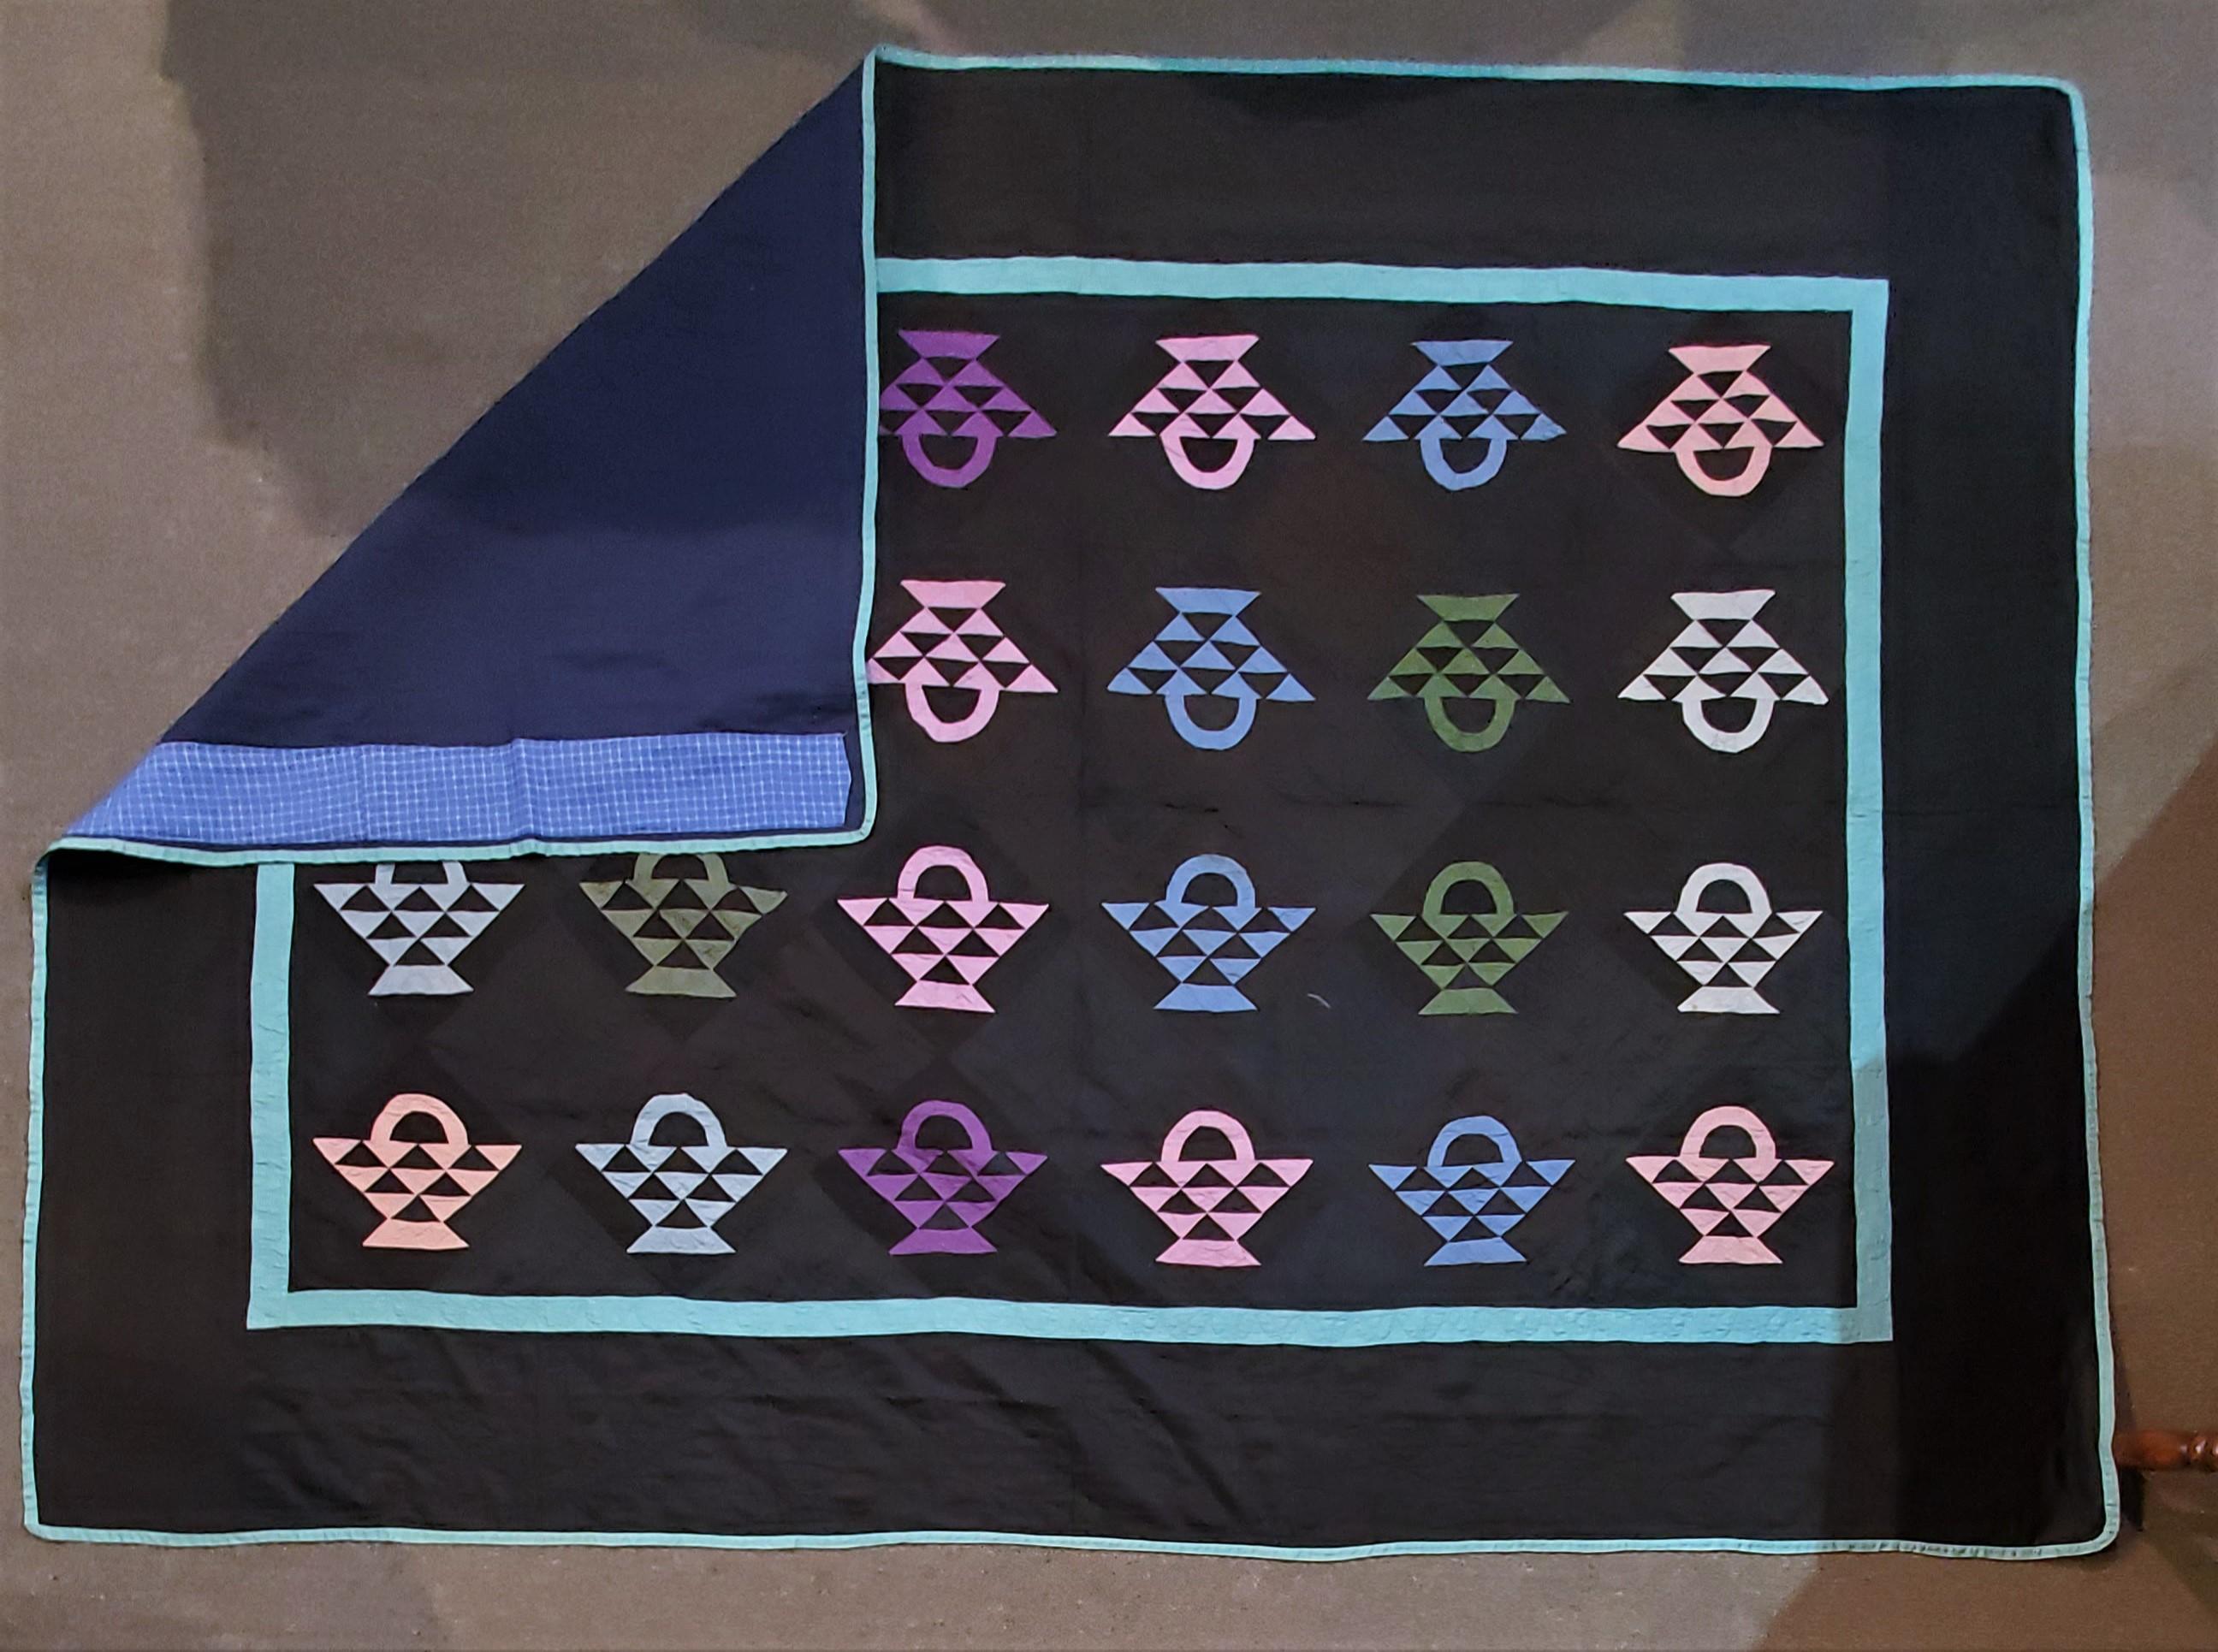 Beautiful authentic Amish quilt from Holmes Co., Ohio,
circa 1930s
The baskets are treadle machine, pieced in various shades of blue, green, pink and purple. Set with black cotton sateen. The inner border and binding are blue-green; it is quilted